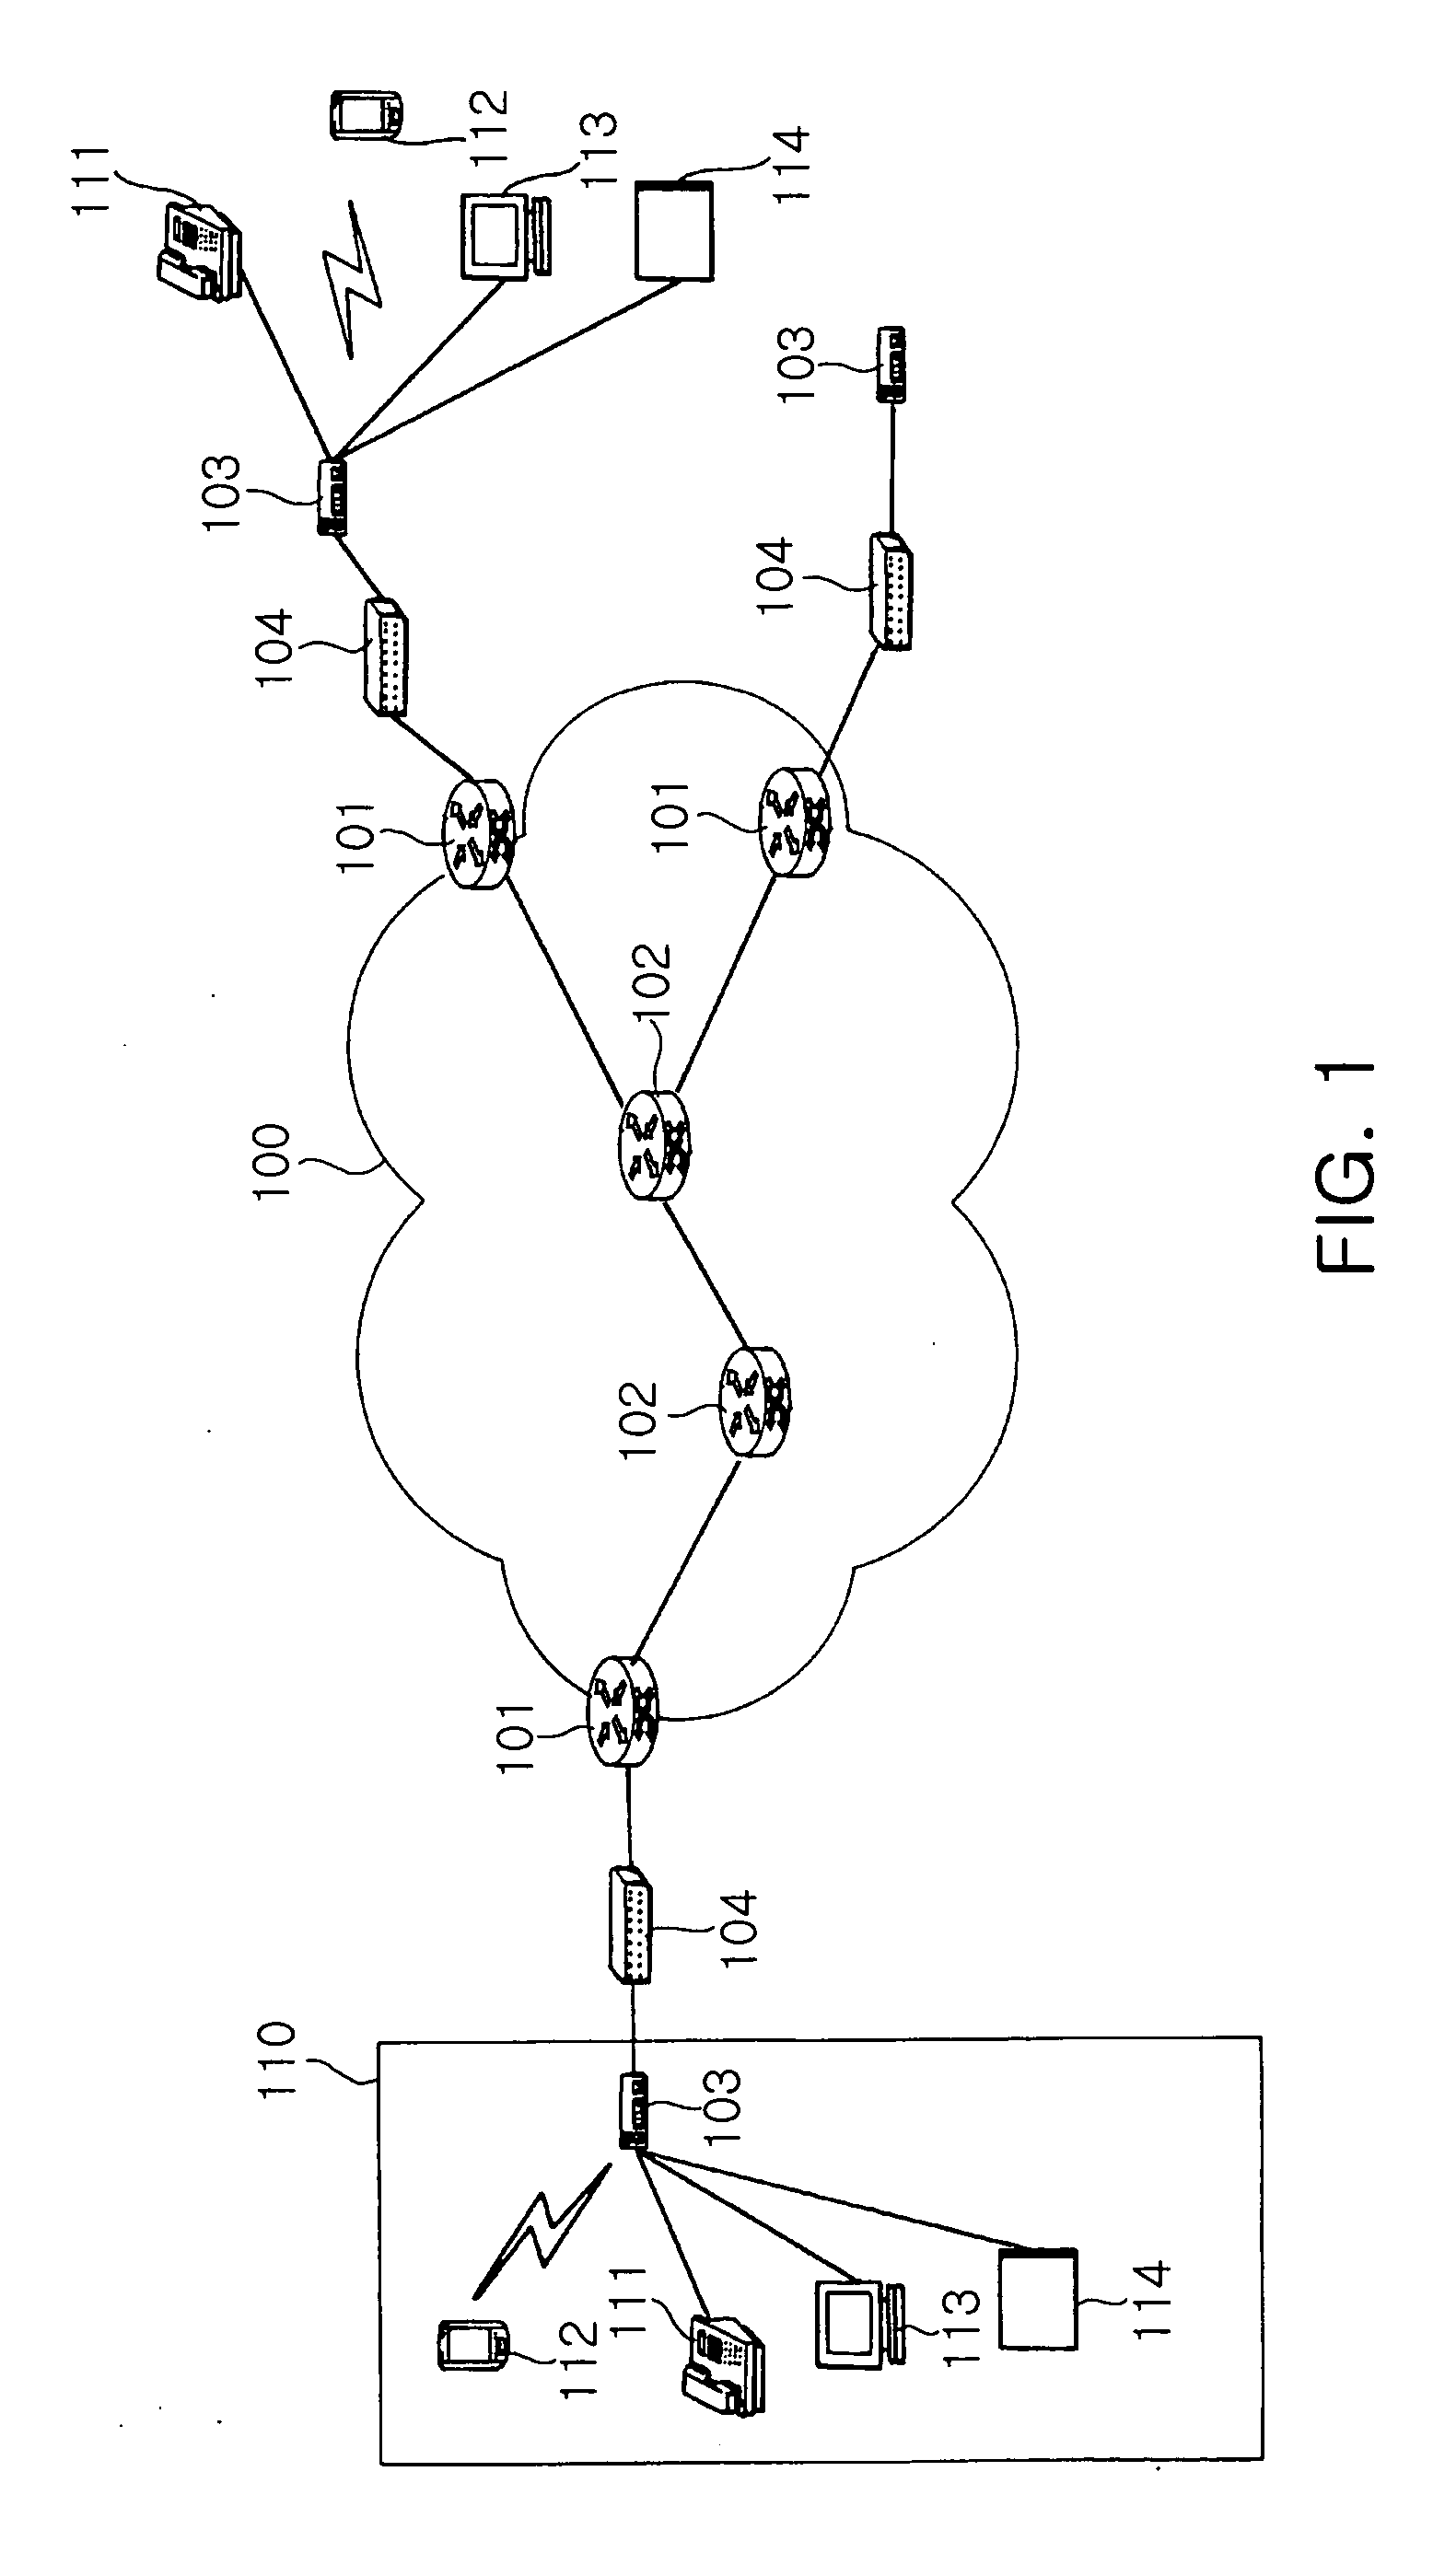 System and method for guaranteeing quality of service in IP networks